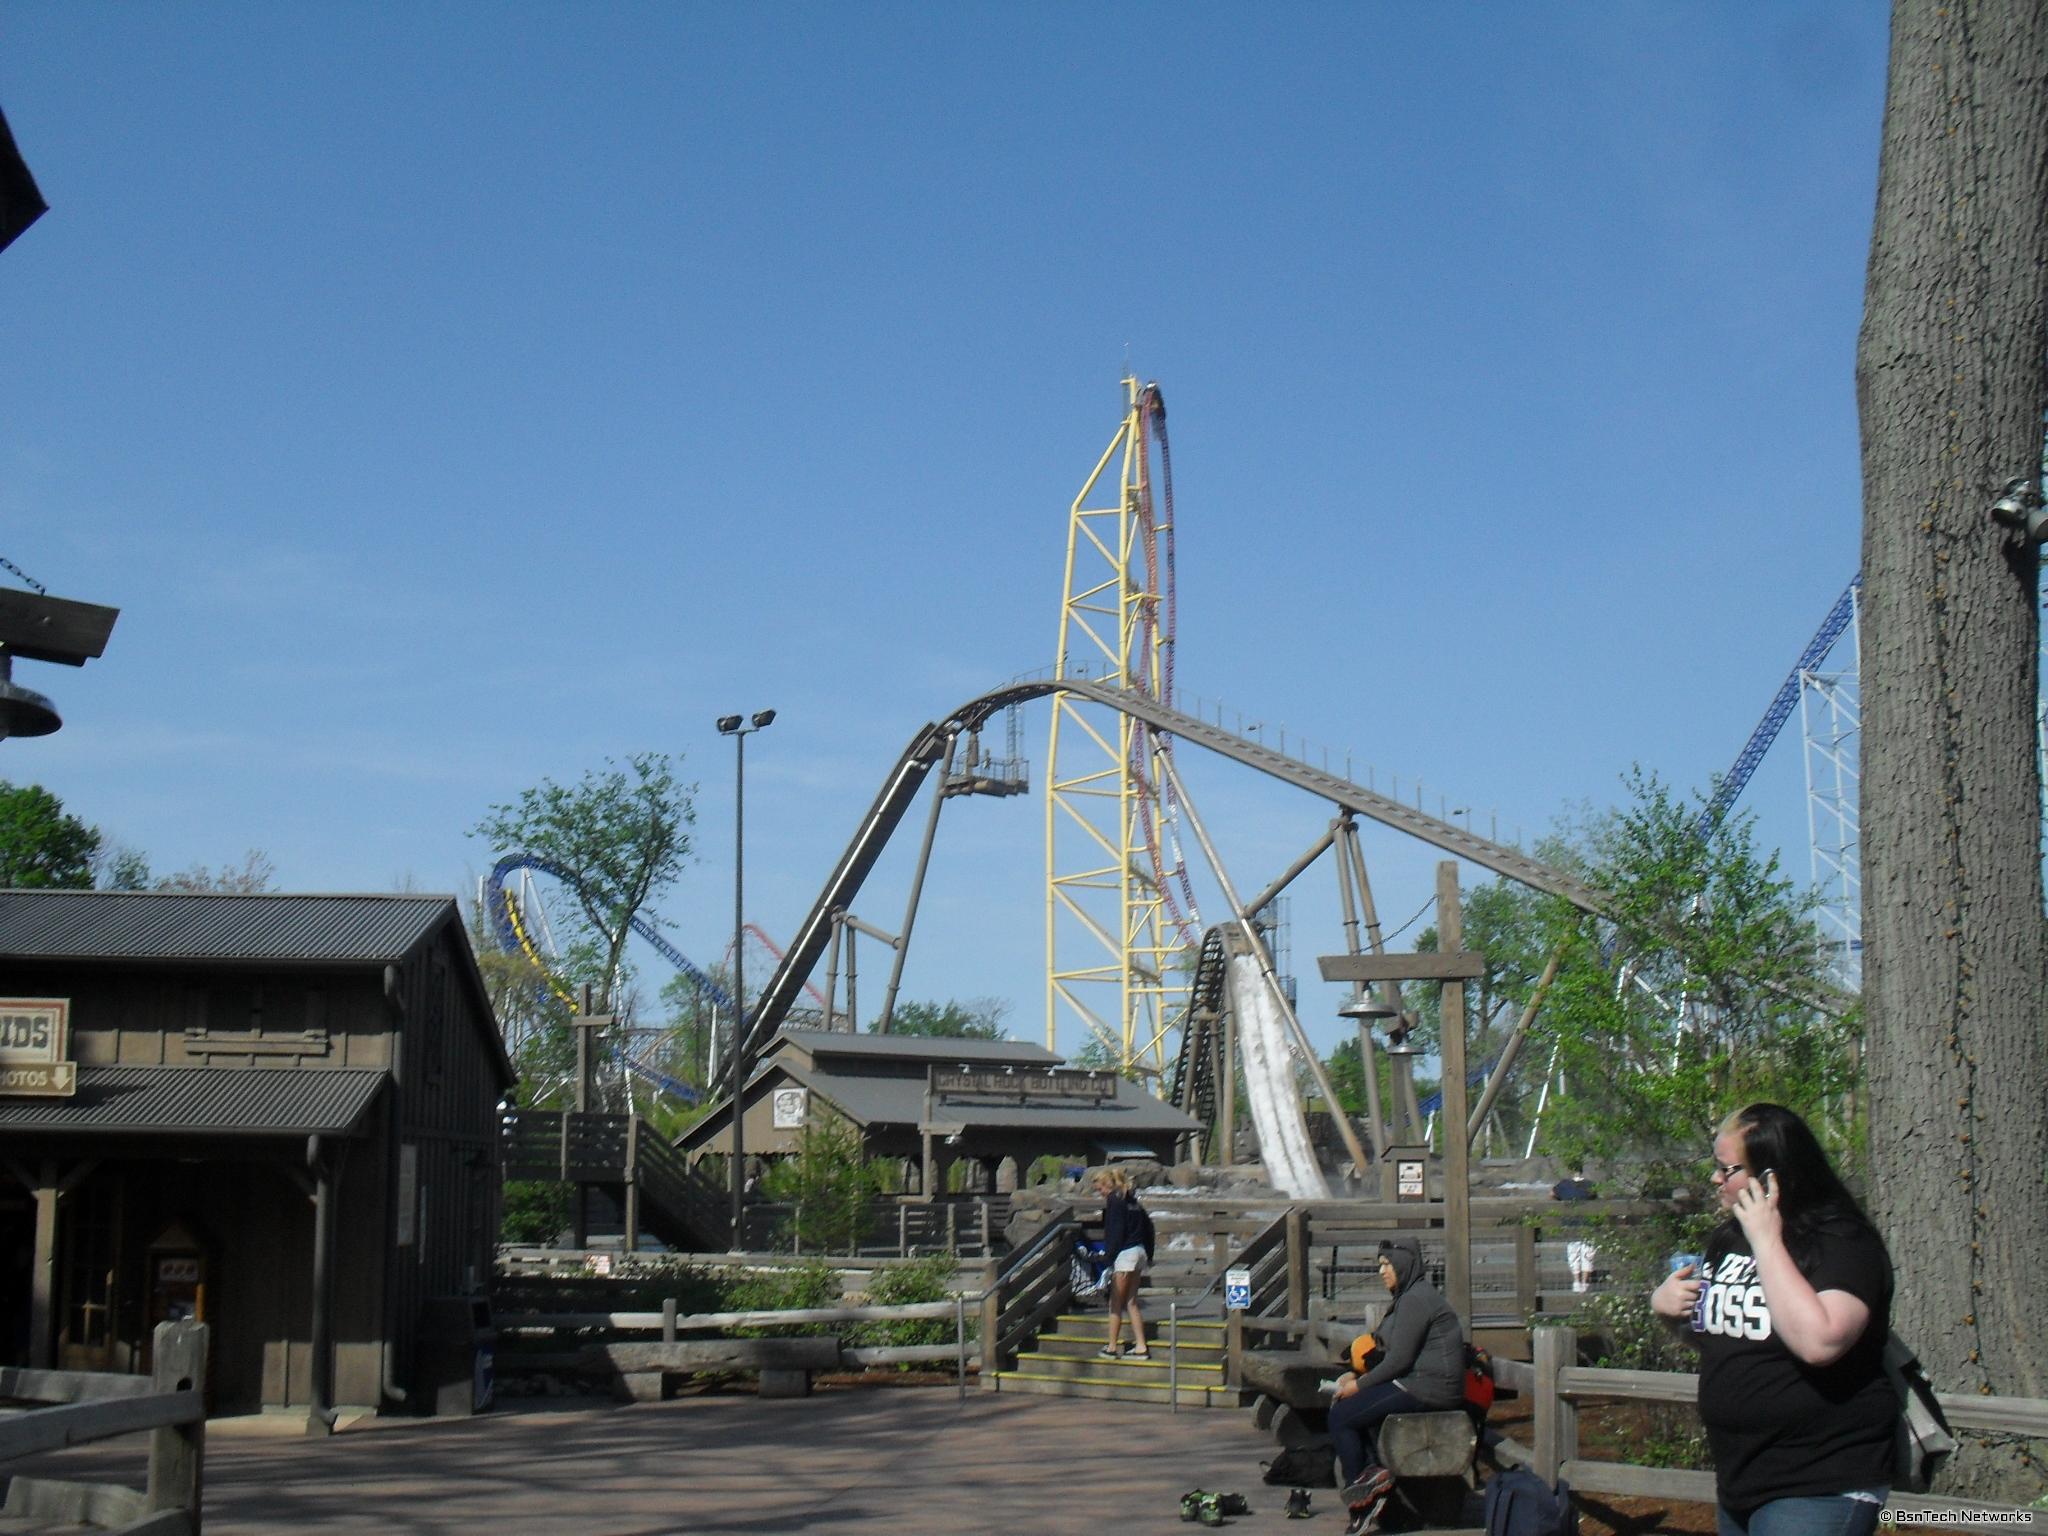 Shoot The Rapids & Top Thrill Dragster